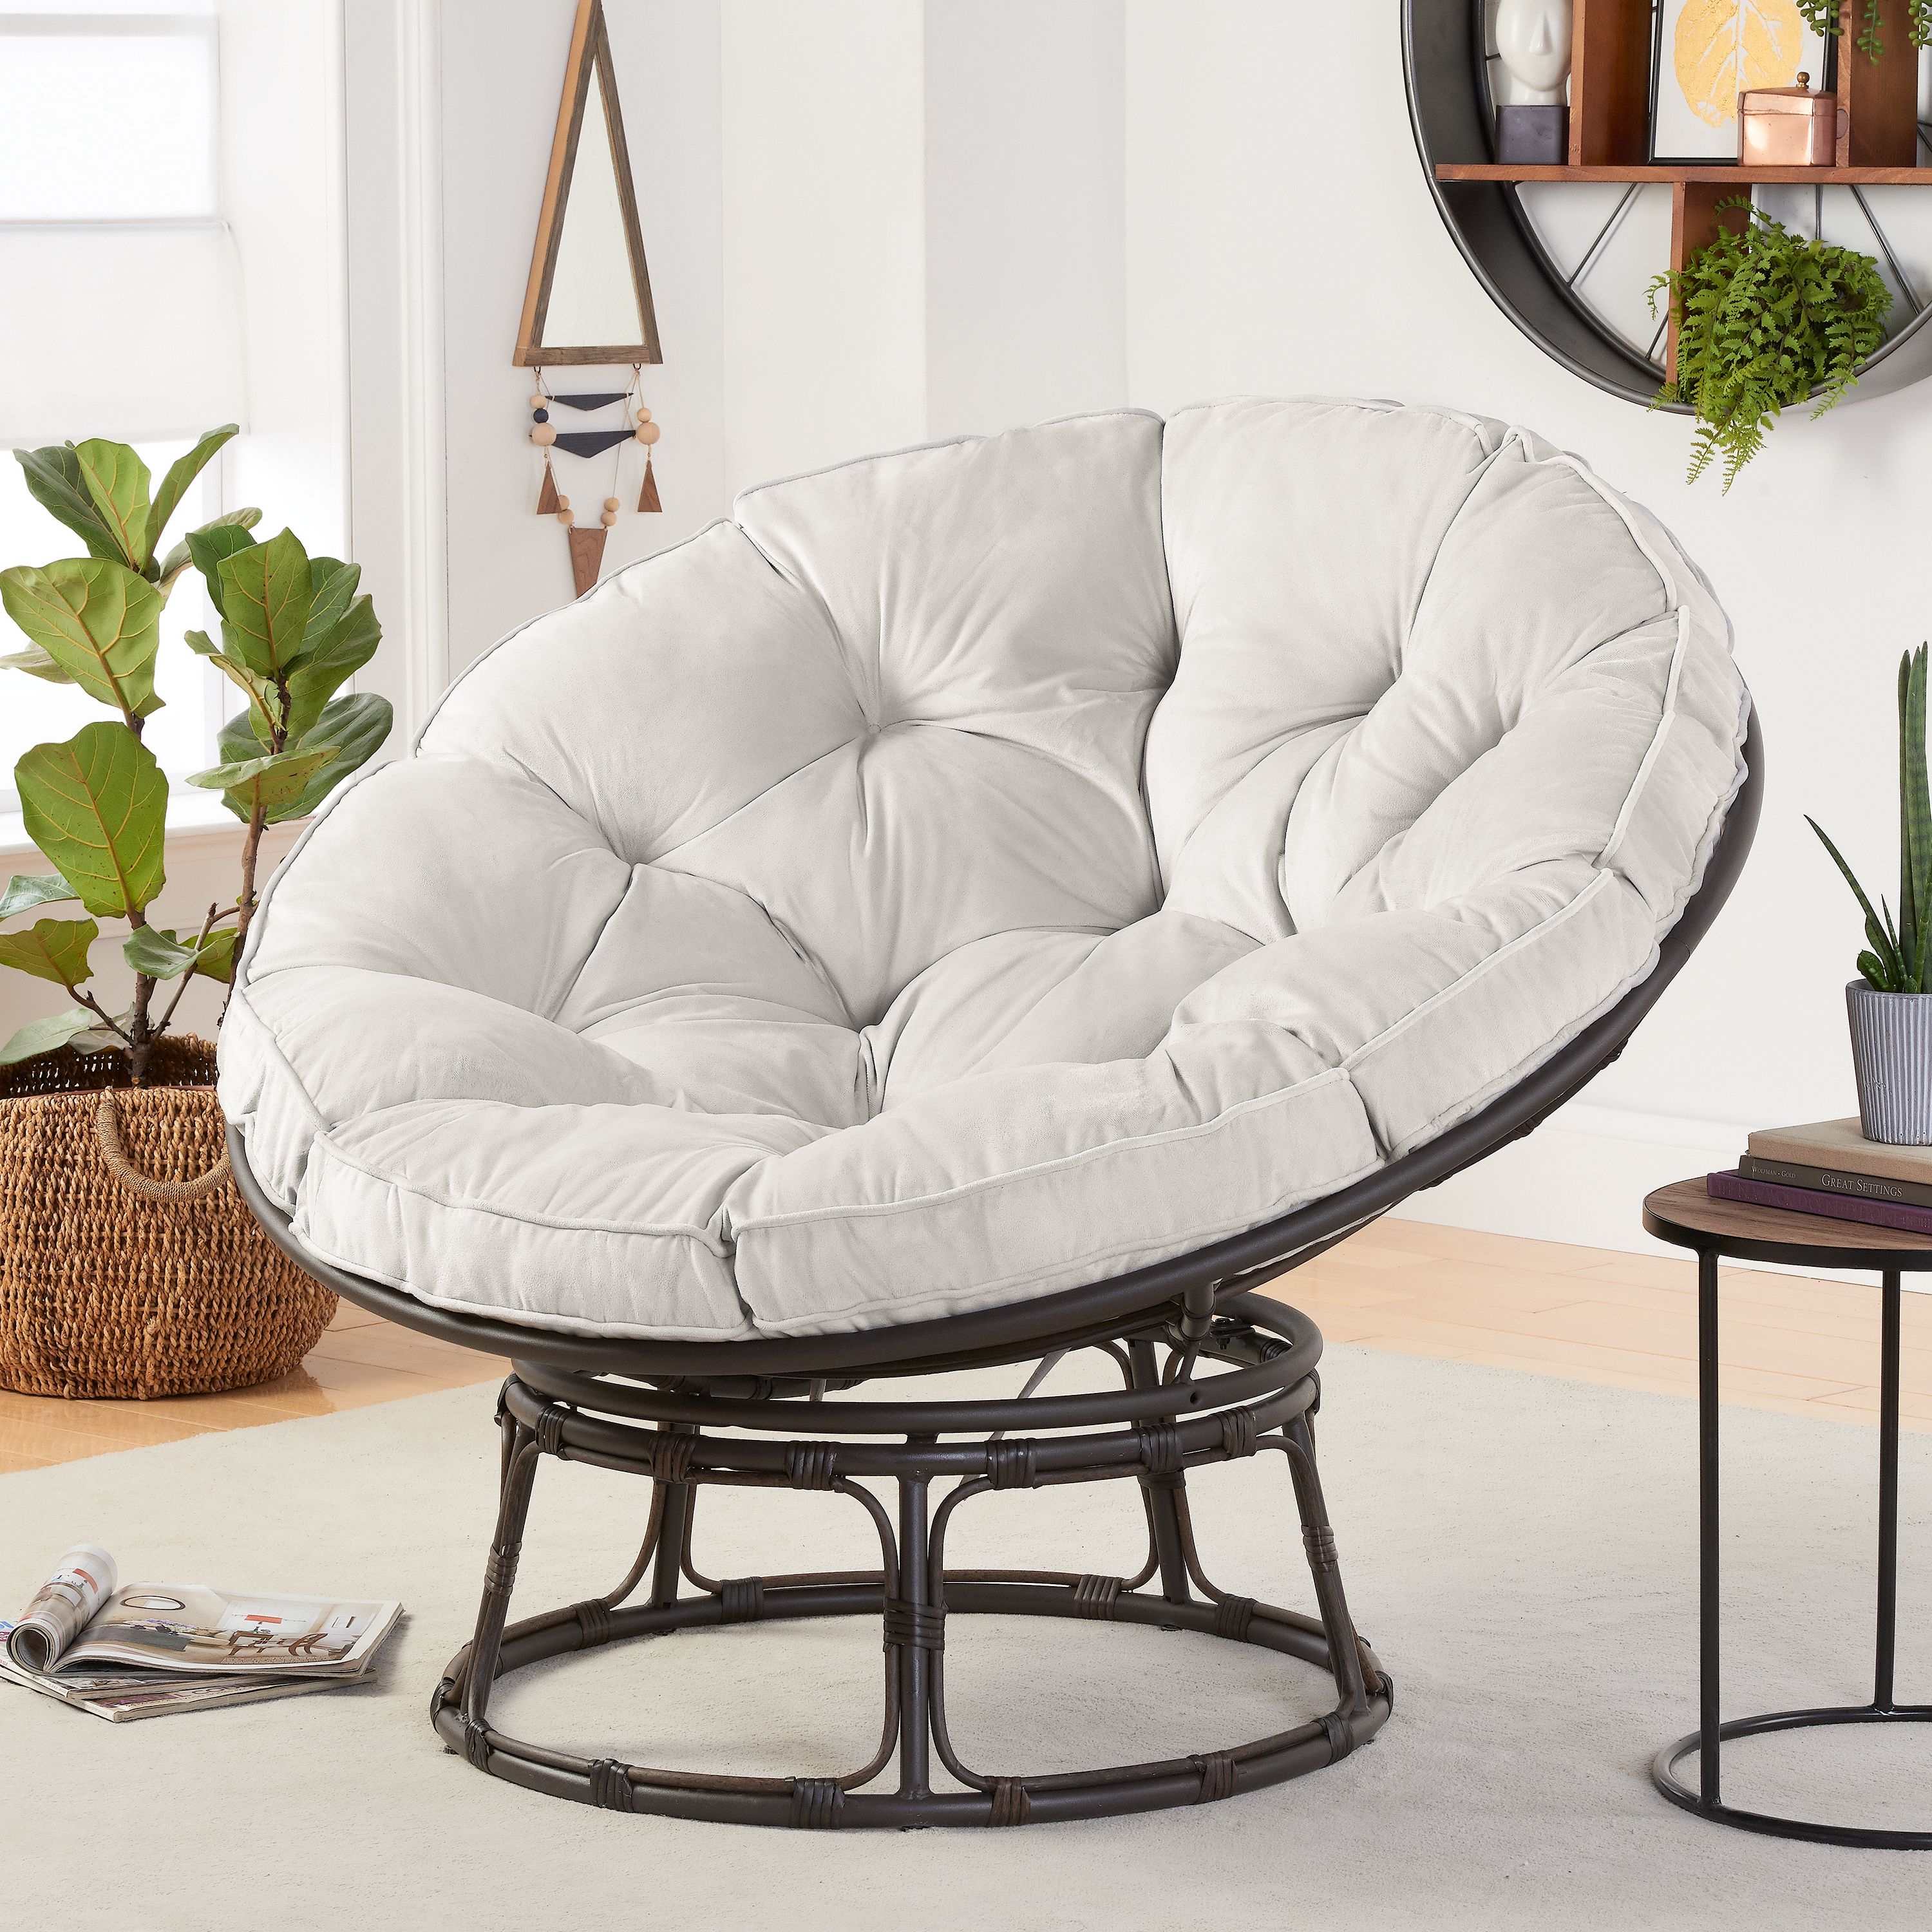 Better Homes & Gardens Papasan Chair with Fabric Cushion, Pumice Gray - image 1 of 5